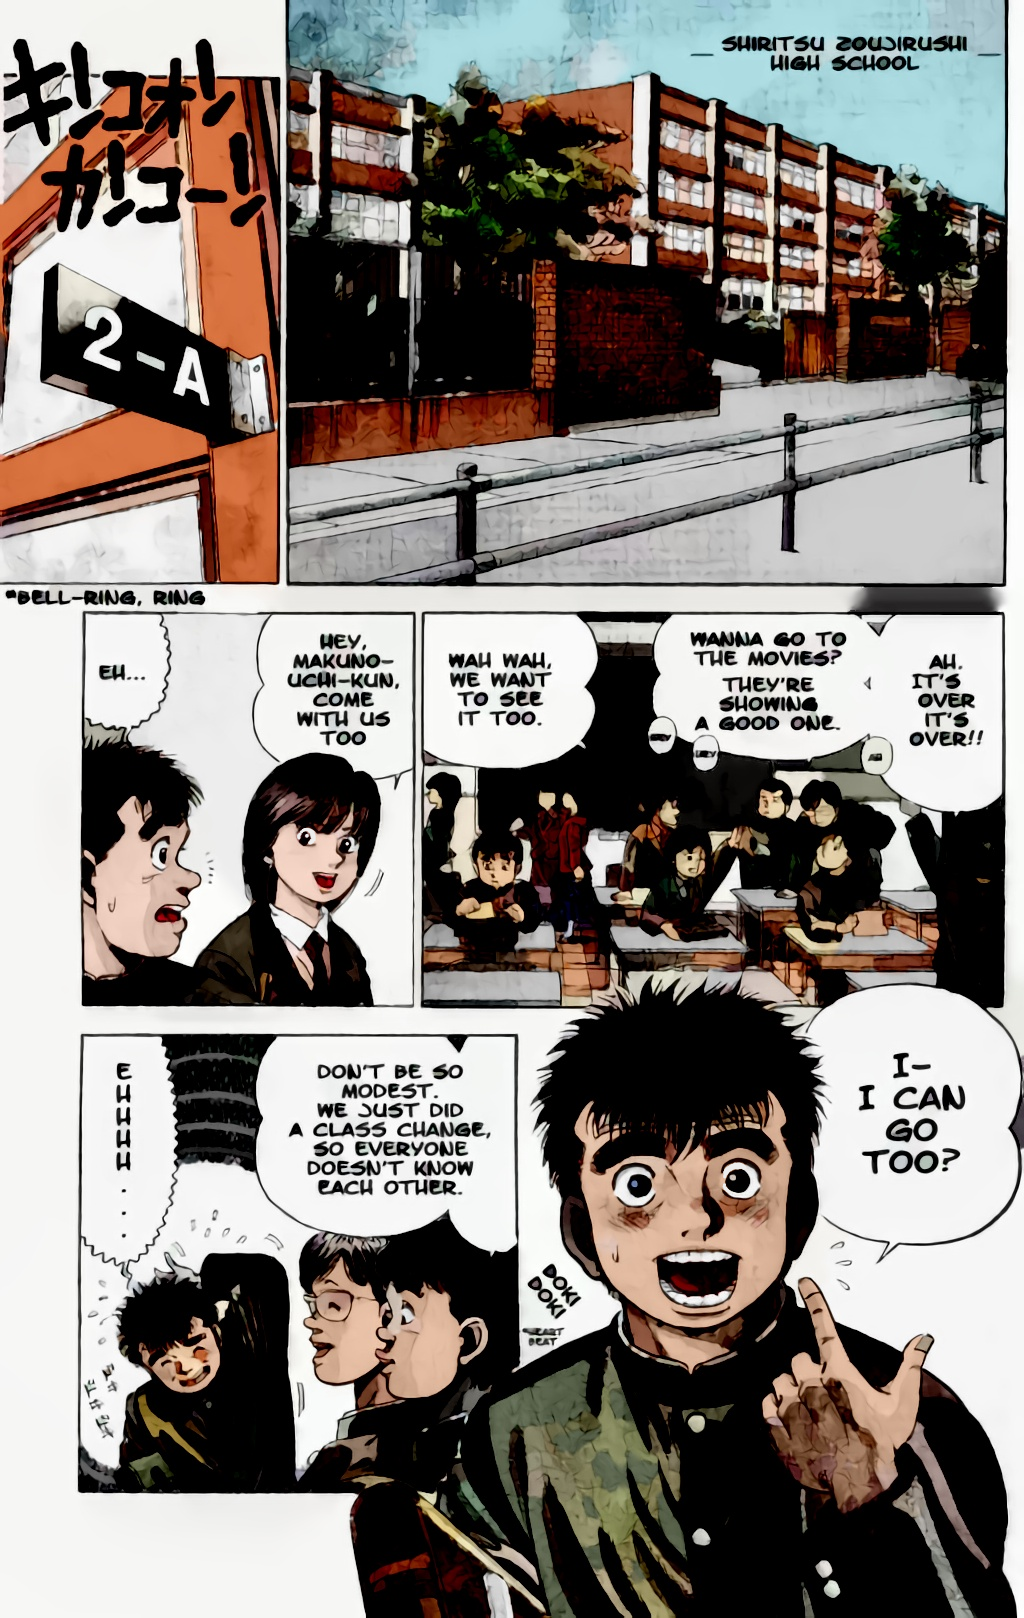 Preview Of Hajime No Ippo Colorized - Comics , HD Wallpaper & Backgrounds